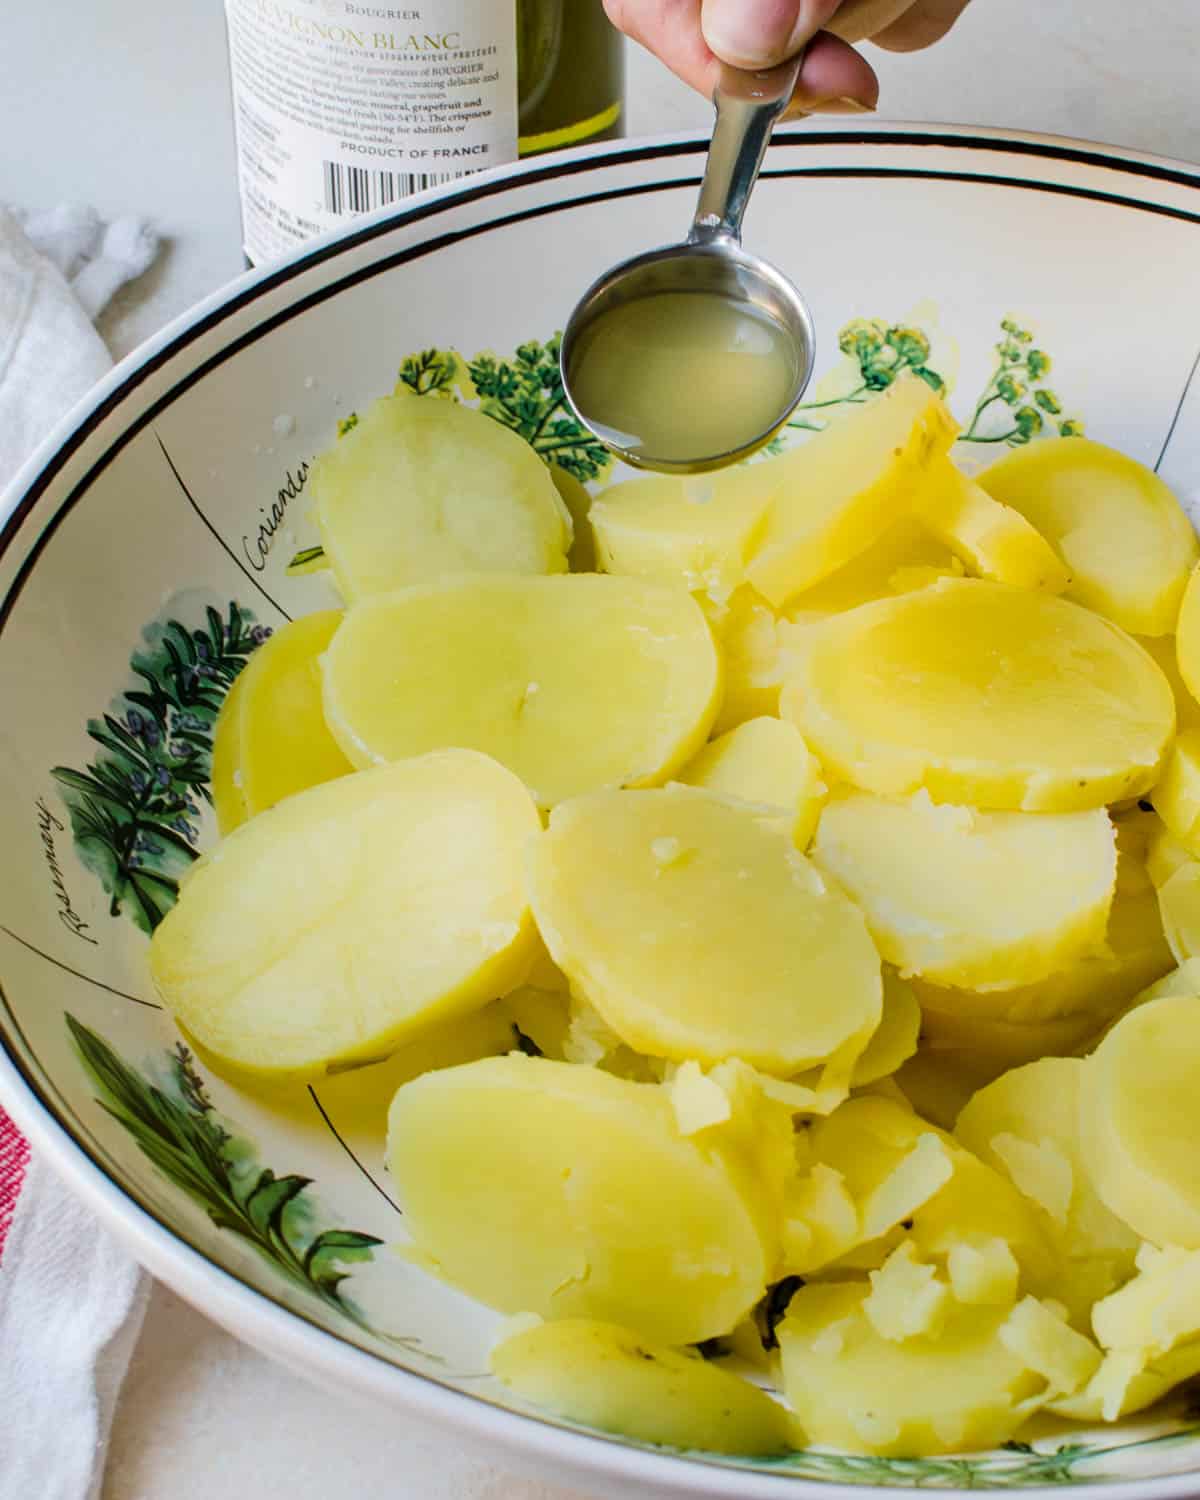 Dressing the hot potatoes with wine and chicken broth.